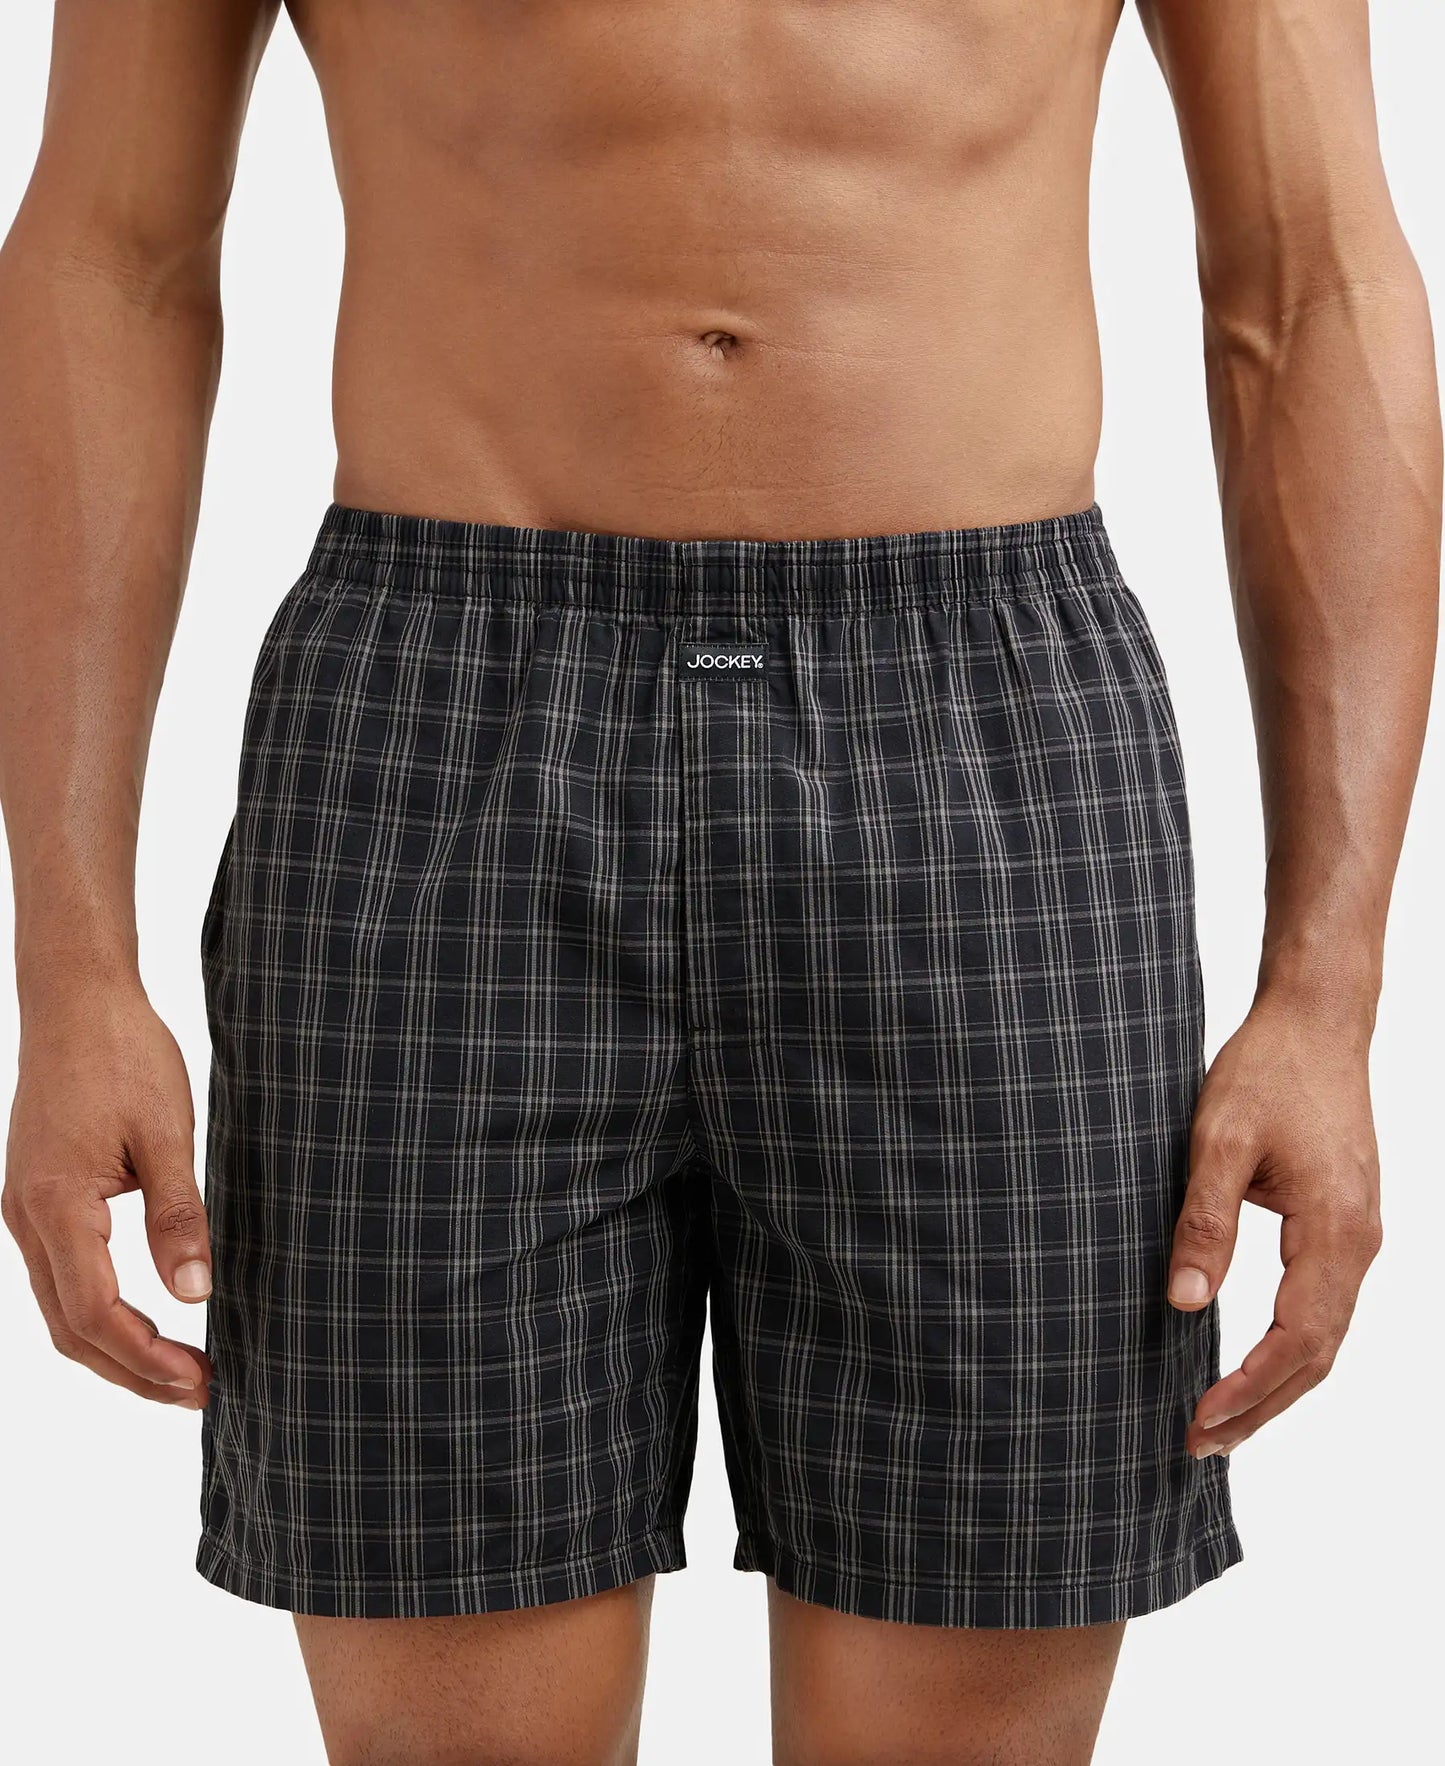 Super Combed Mercerized Cotton Woven Checkered Boxer Shorts with Side Pocket - Navy & Black(Pack of 2)